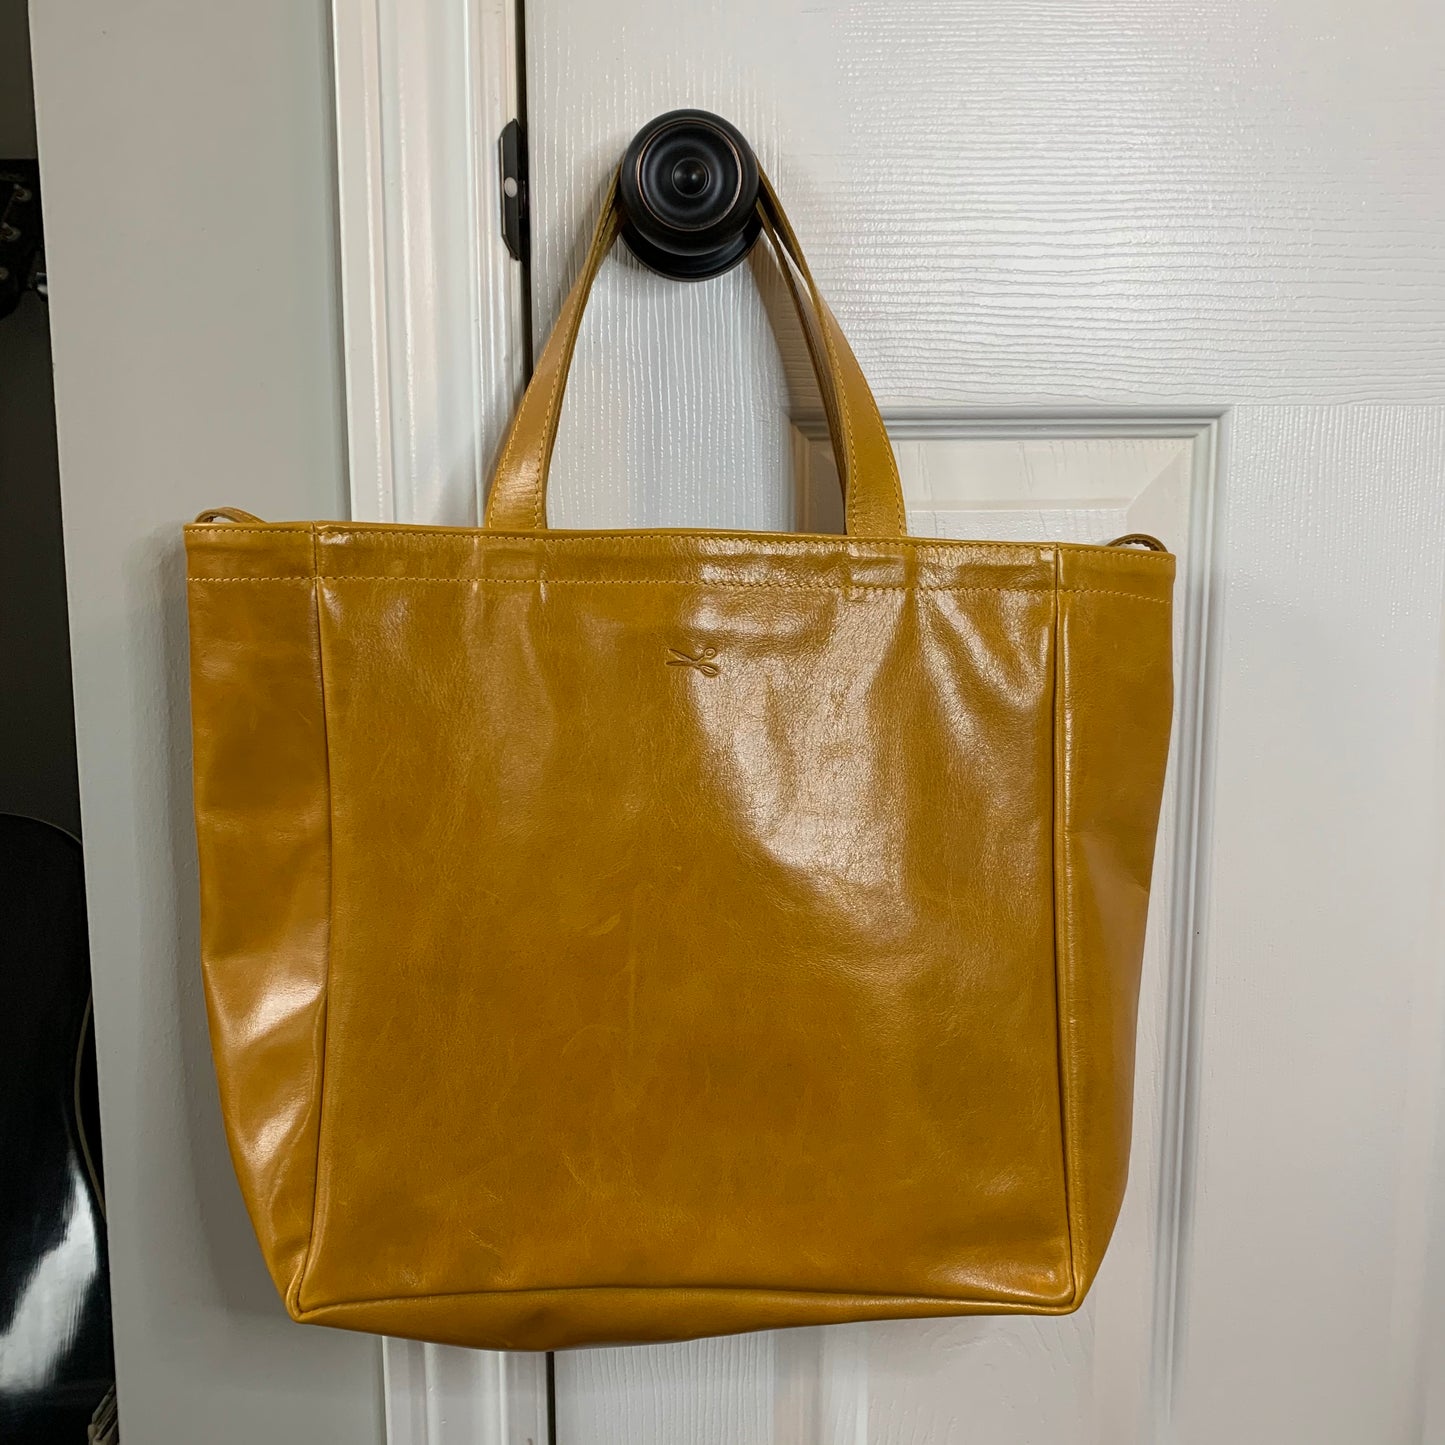 Small Leather Tote Bag